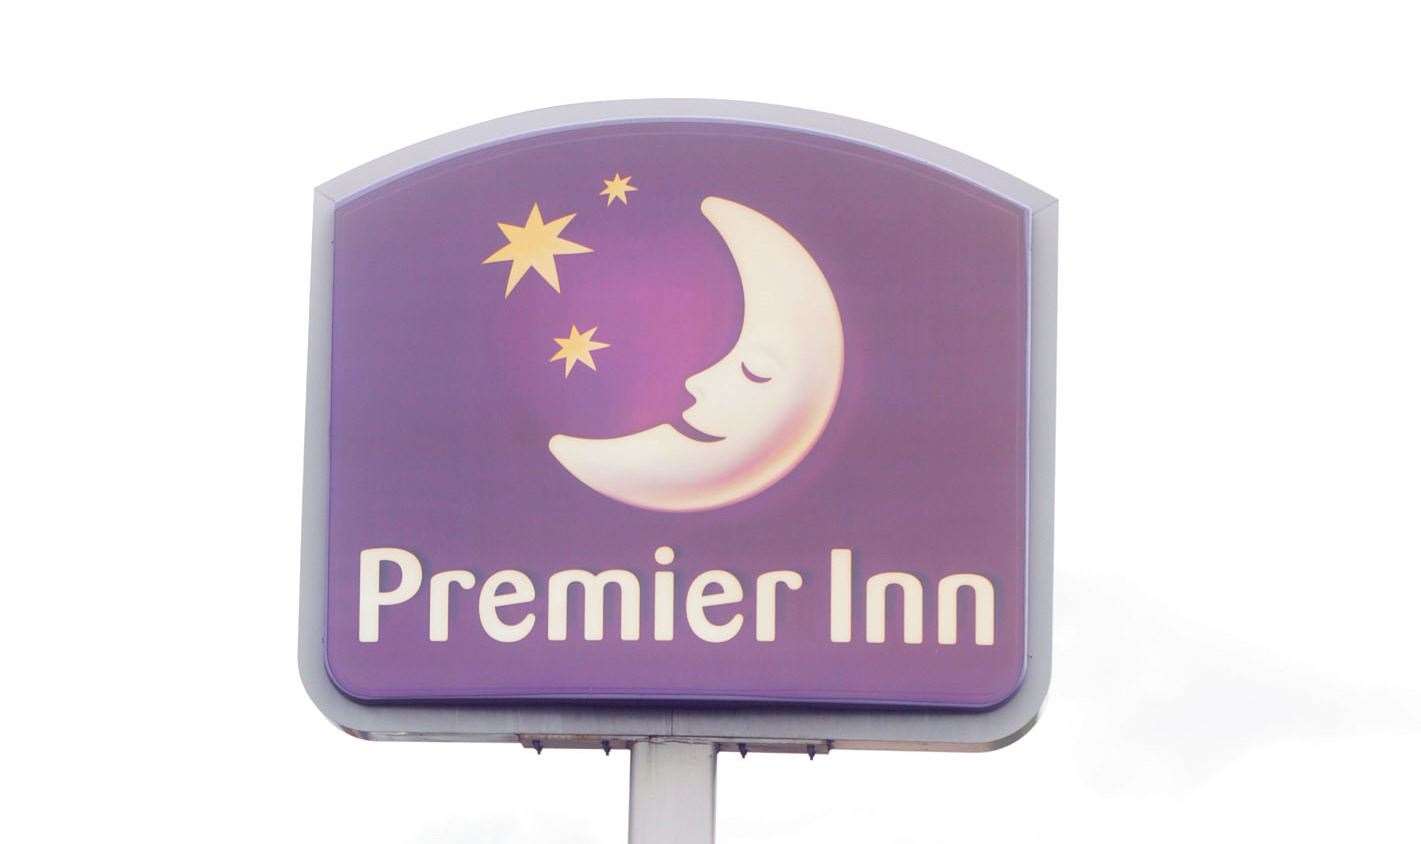 Large numbers of Premier Inn hotel rooms are sold out for London Marathon weekend